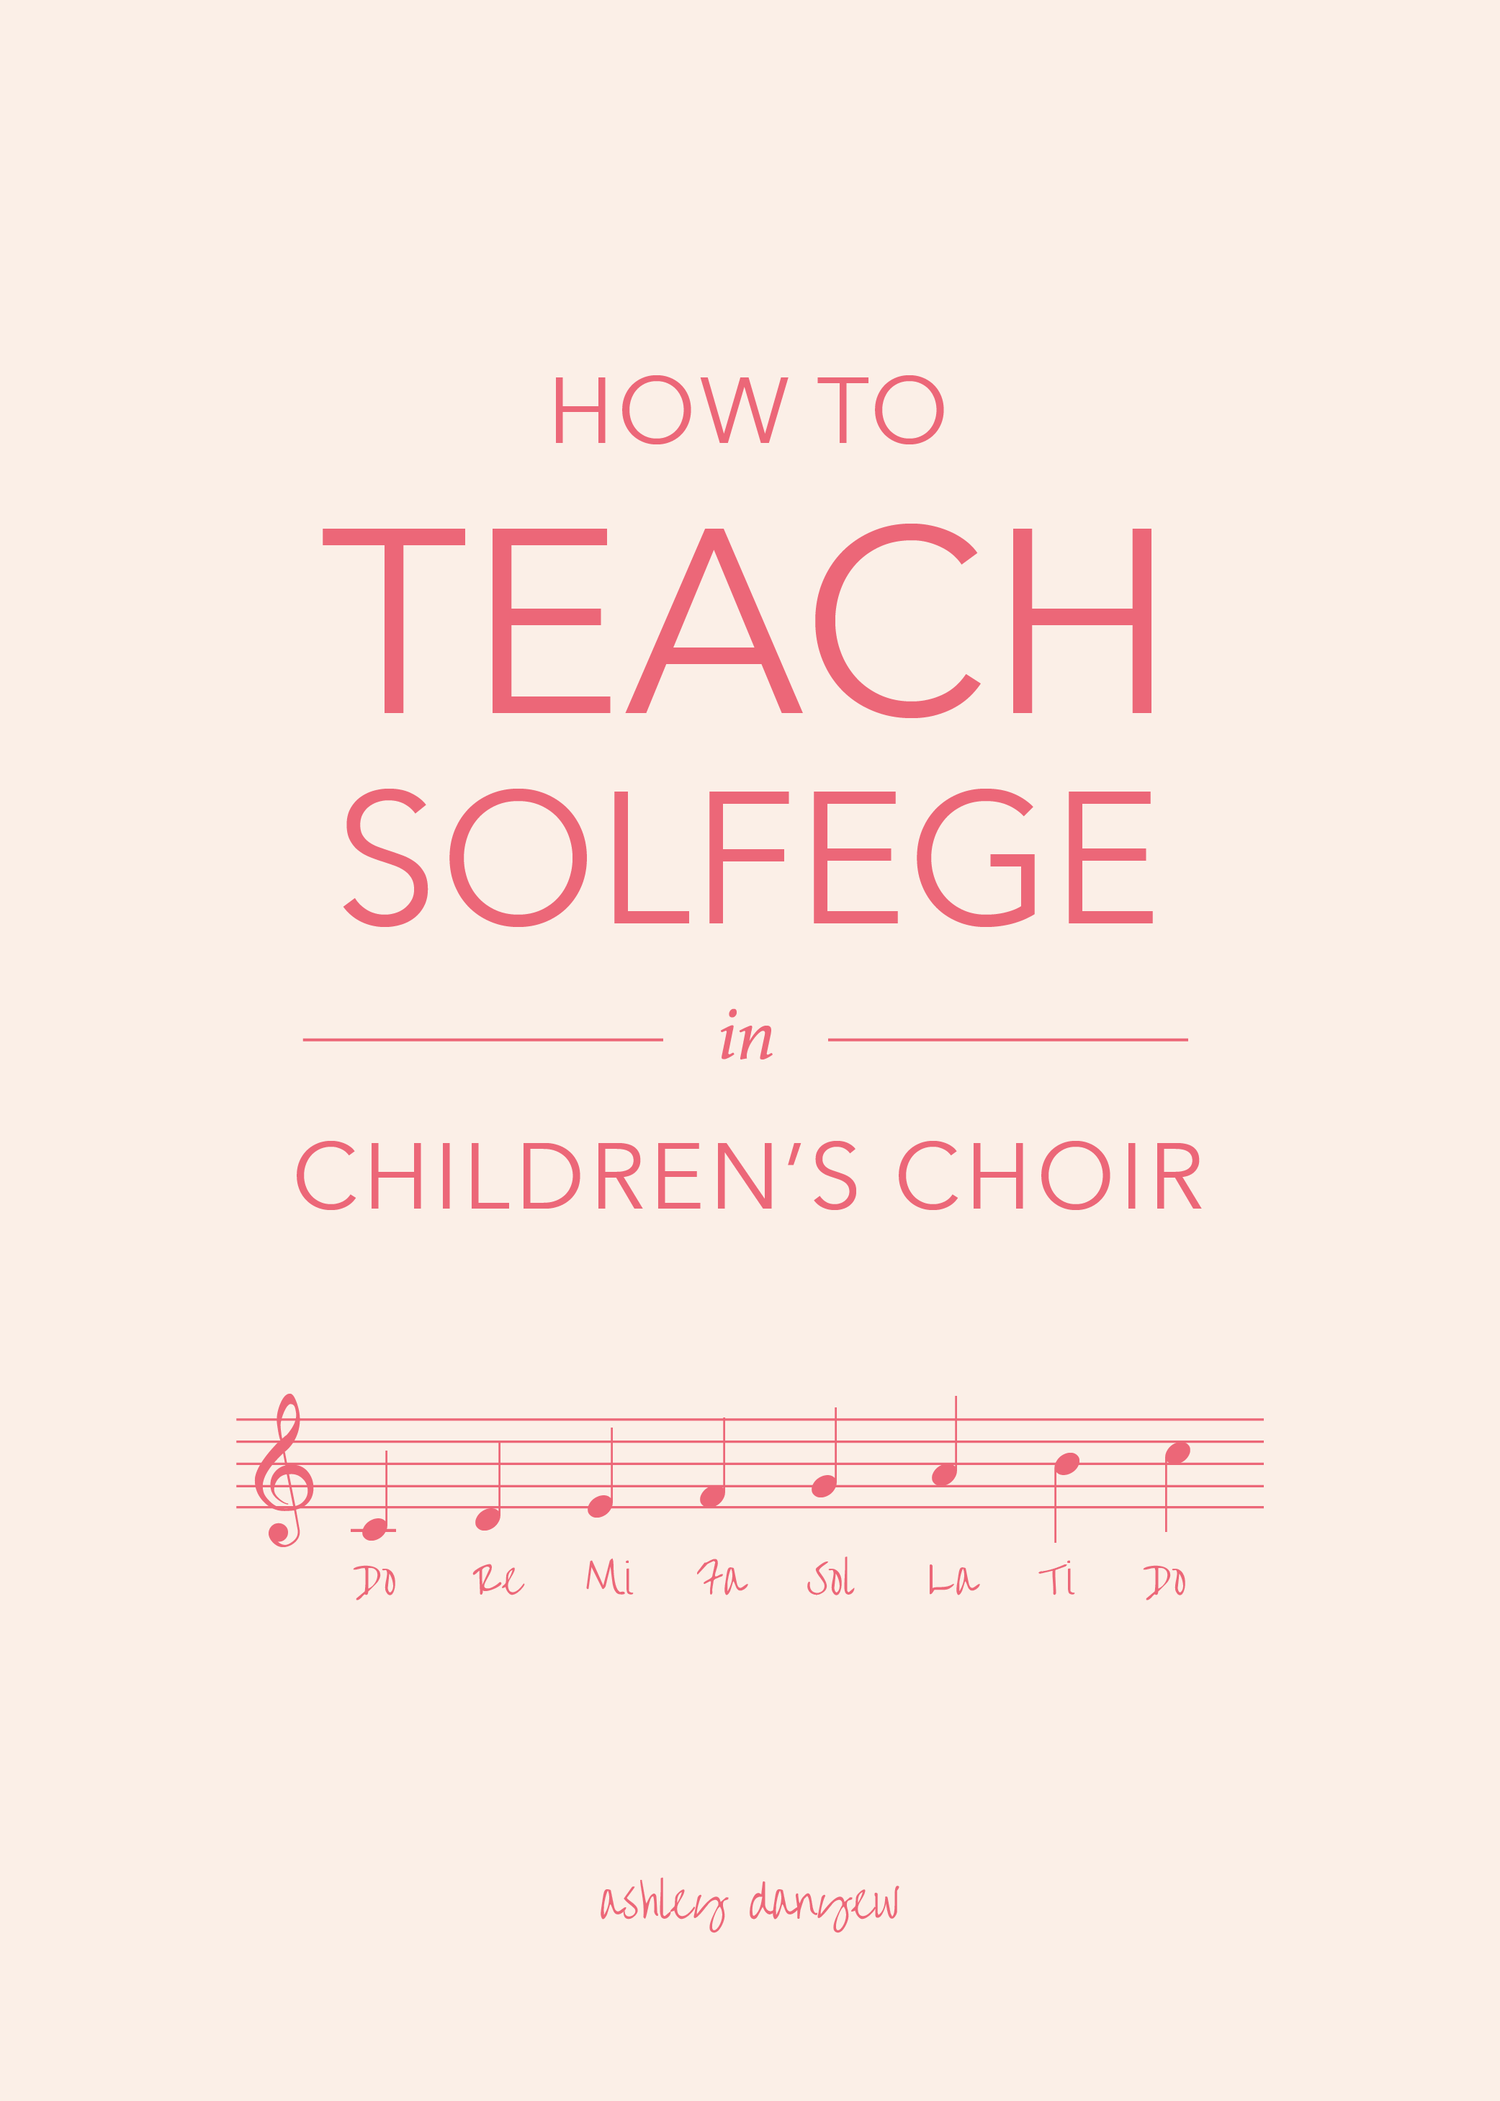 Choral Vocal Coach Choir Room Solfege Signs Gallery Wall Vocal Lessons Singing Conductor Music Choir Do Re Mi Fa Sol La Ti Do